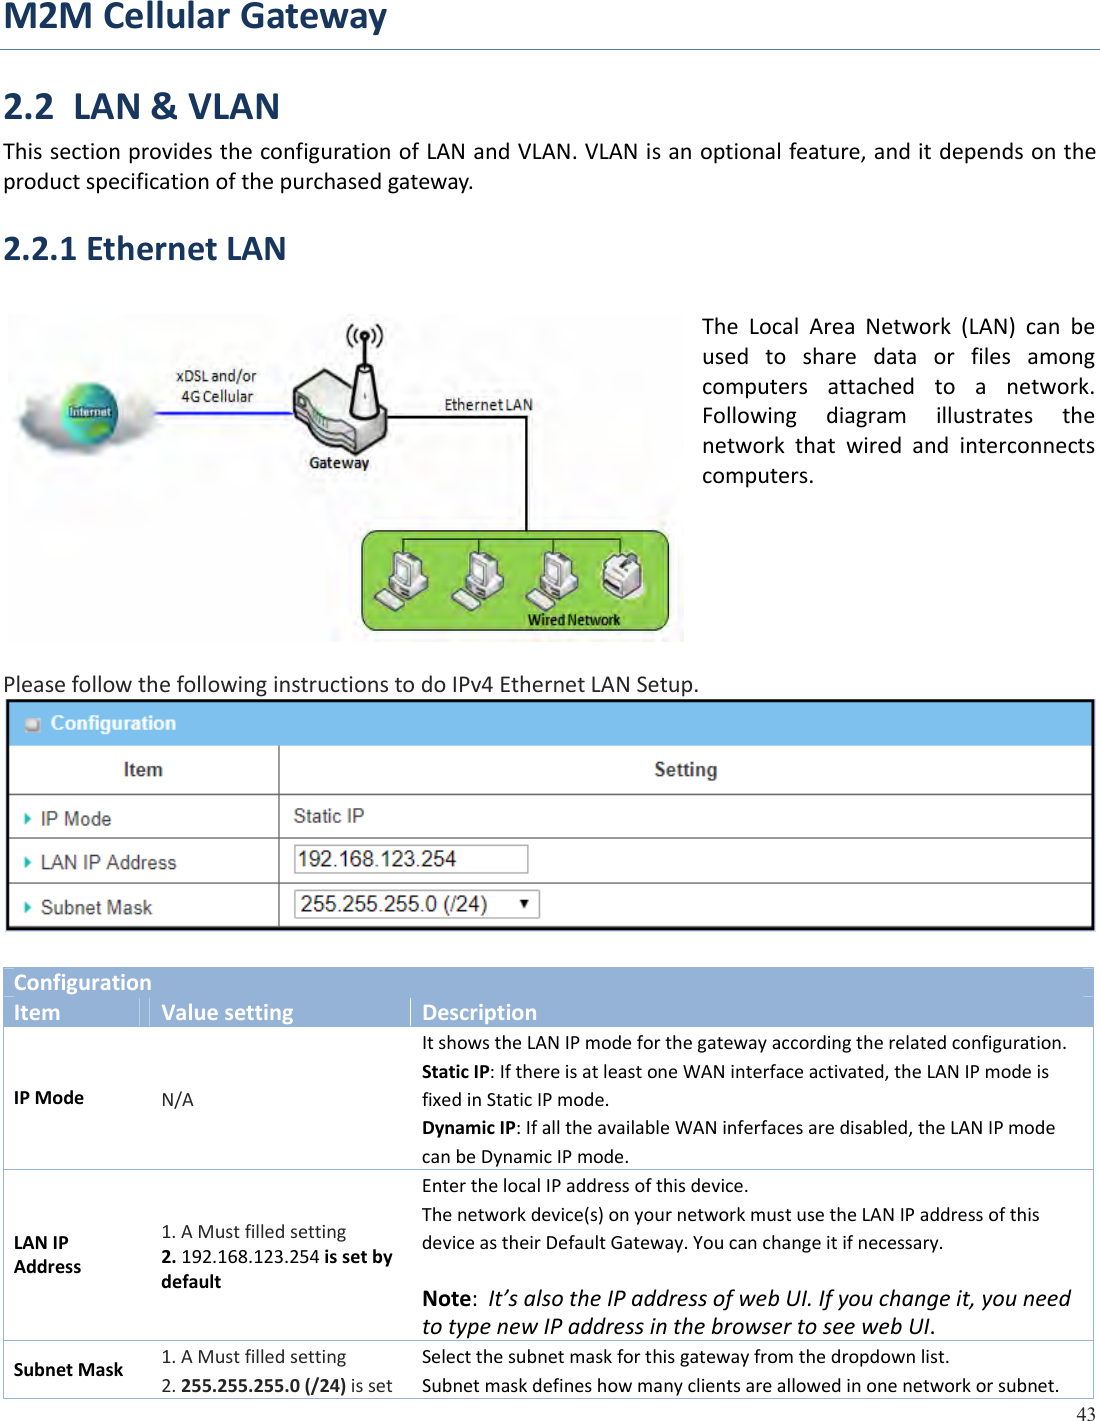 M2MCellularGateway 43  2.2LAN&amp;VLANThissectionprovidestheconfigurationofLANandVLAN.VLANisanoptionalfeature,anditdependsontheproductspecificationofthepurchasedgateway.2.2.1EthernetLANThe Local Area Network (LAN) can beused to share data or files amongcomputers attached to a network.Following diagram illustrates thenetworkthatwiredandinterconnectscomputers.PleasefollowthefollowinginstructionstodoIPv4EthernetLANSetup. ConfigurationItem Valuesetting DescriptionIPMode N/AItshowstheLANIPmodeforthegatewayaccordingtherelatedconfiguration.StaticIP:IfthereisatleastoneWANinterfaceactivated,theLANIPmodeisfixedinStaticIPmode.DynamicIP:IfalltheavailableWANinferfacesaredisabled,theLANIPmodecanbeDynamicIPmode.LANIPAddress1.AMustfilledsetting2.192.168.123.254issetbydefaultEnterthelocalIPaddressofthisdevice.Thenetworkdevice(s)onyournetworkmustusetheLANIPaddressofthisdeviceastheirDefaultGateway.Youcanchangeitifnecessary.Note:It’salsotheIPaddressofwebUI.Ifyouchangeit,youneedtotypenewIPaddressinthebrowsertoseewebUI.SubnetMask 1.AMustfilledsetting2.255.255.255.0(/24)issetSelectthesubnetmaskforthisgatewayfromthedropdownlist.Subnetmaskdefineshowmanyclientsareallowedinonenetworkorsubnet.